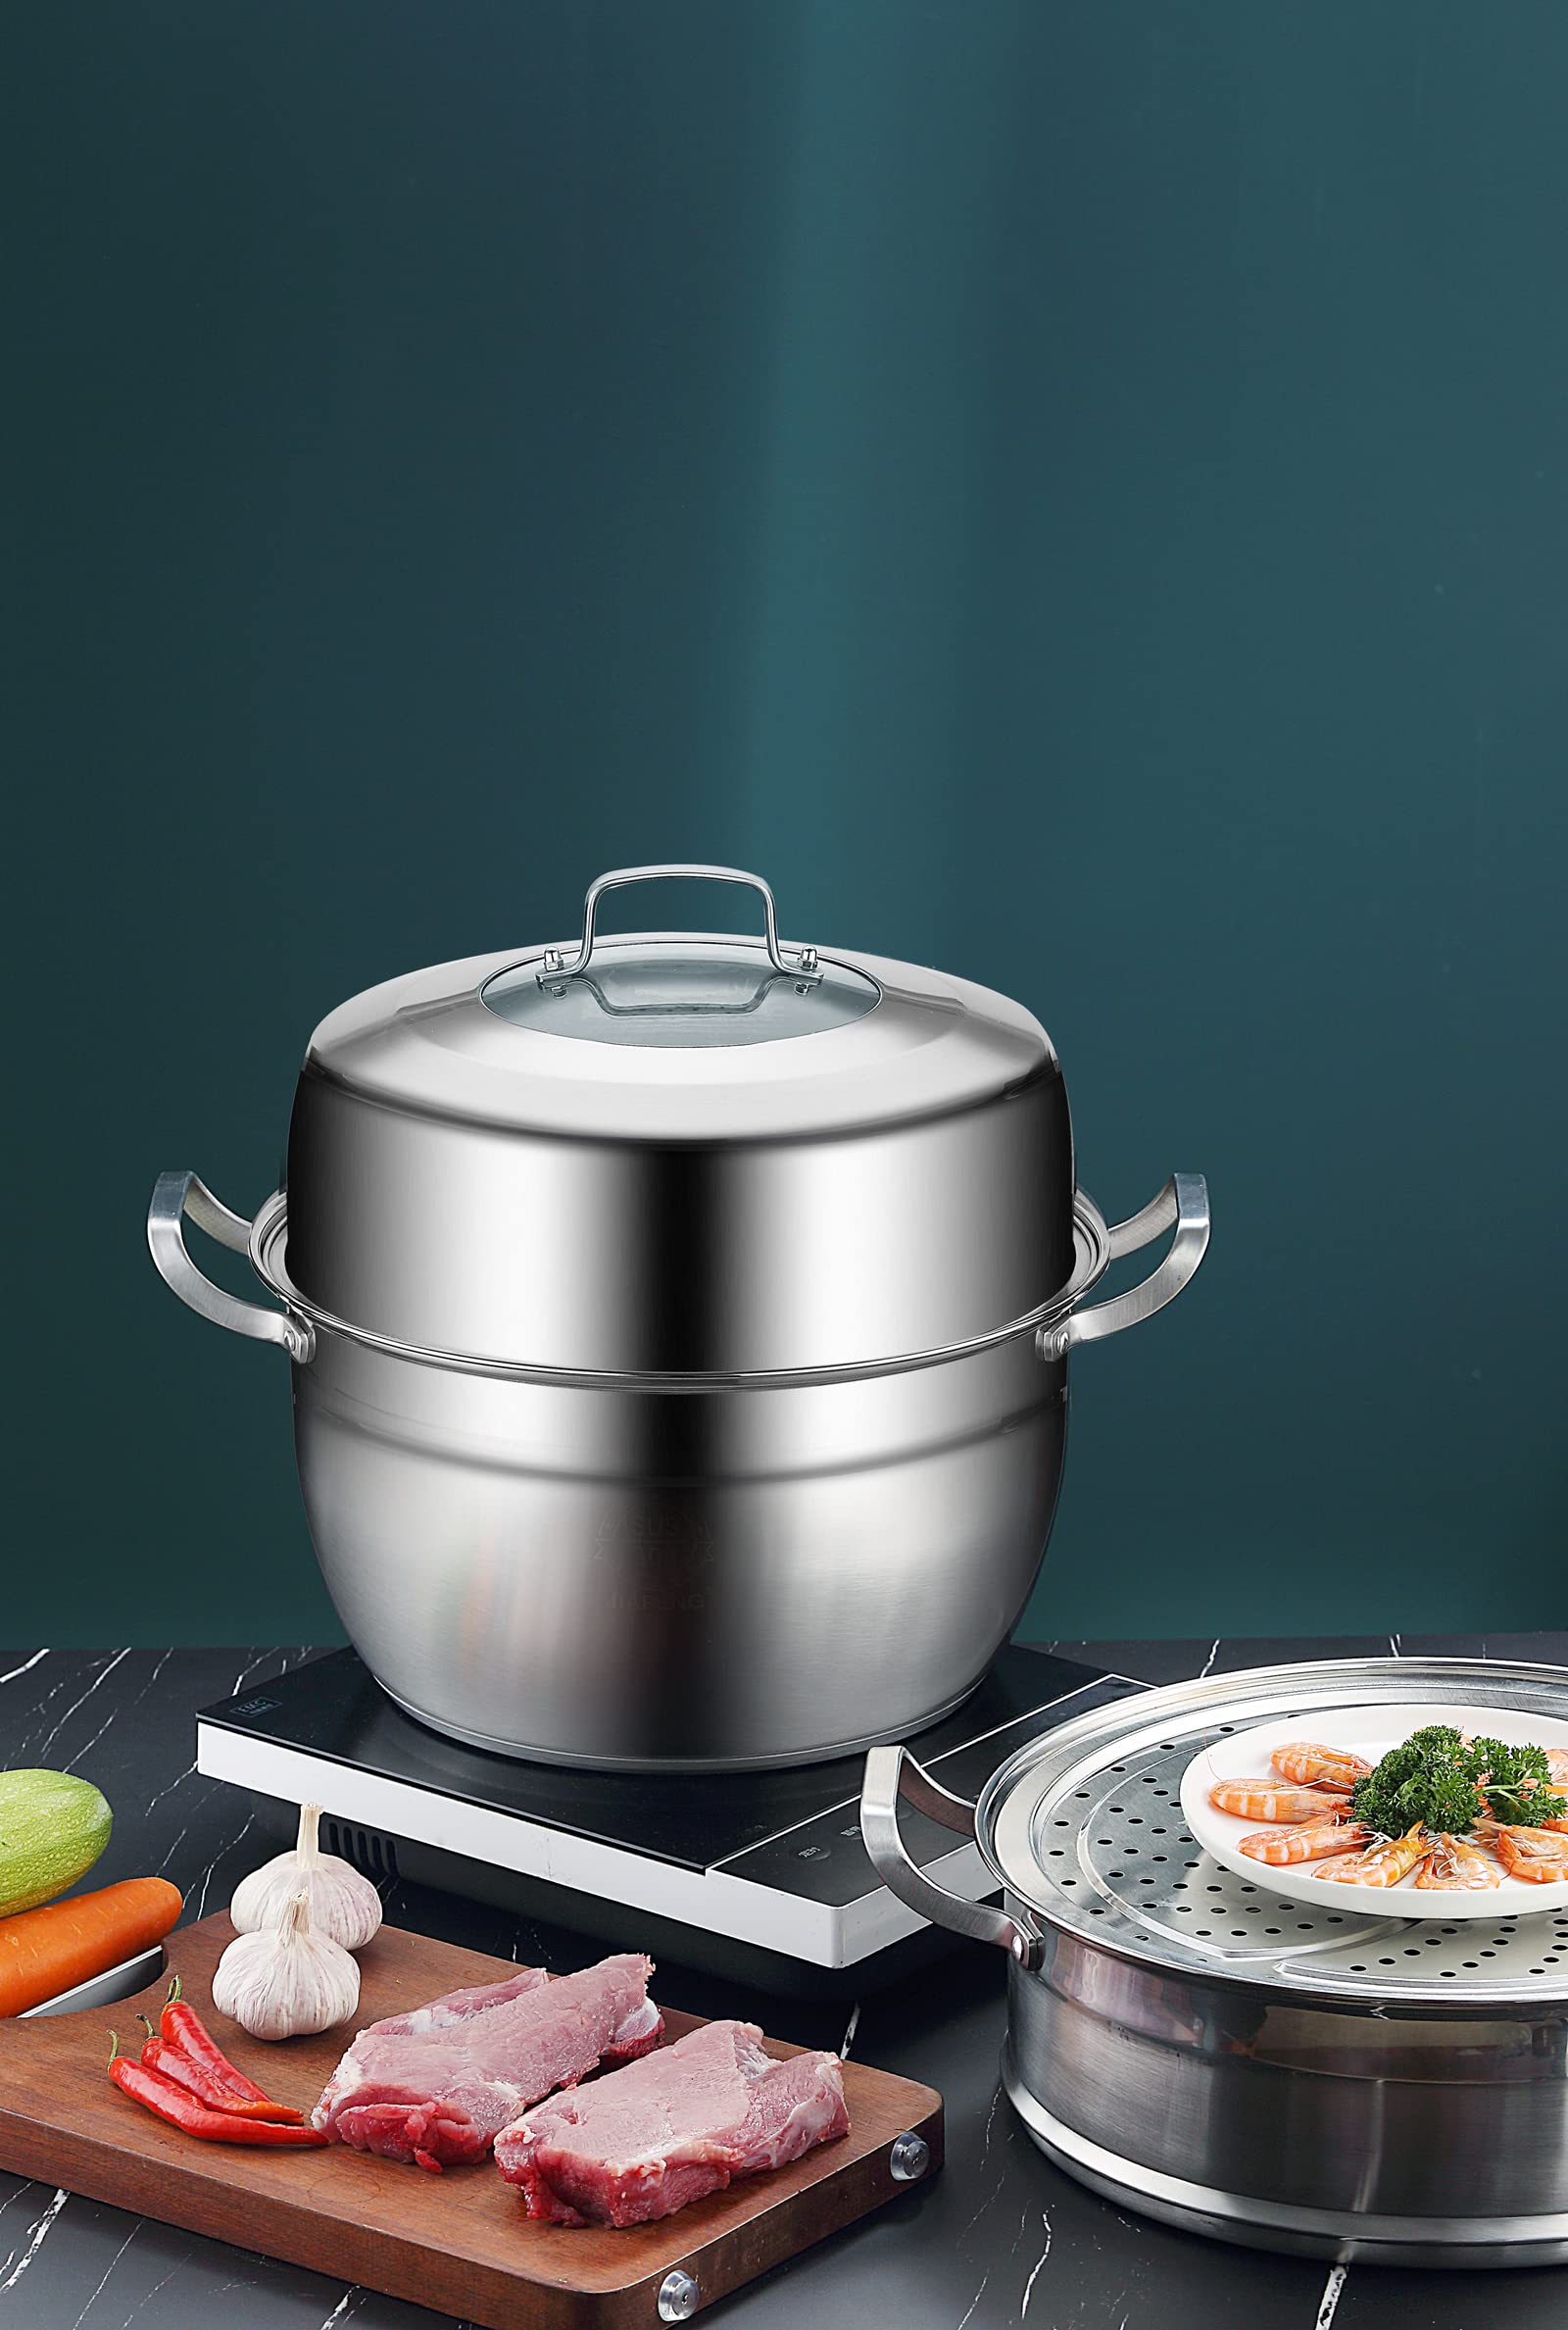 Thick-bottomed Stainless Steel Steamer Pot 2 Tier Food Steamer for Cooking Multipurpose Cookware with Tempered Glass Lid for Vegetable, tamale,Dumpling, egg, Sauce, Food (12.6 INCH)